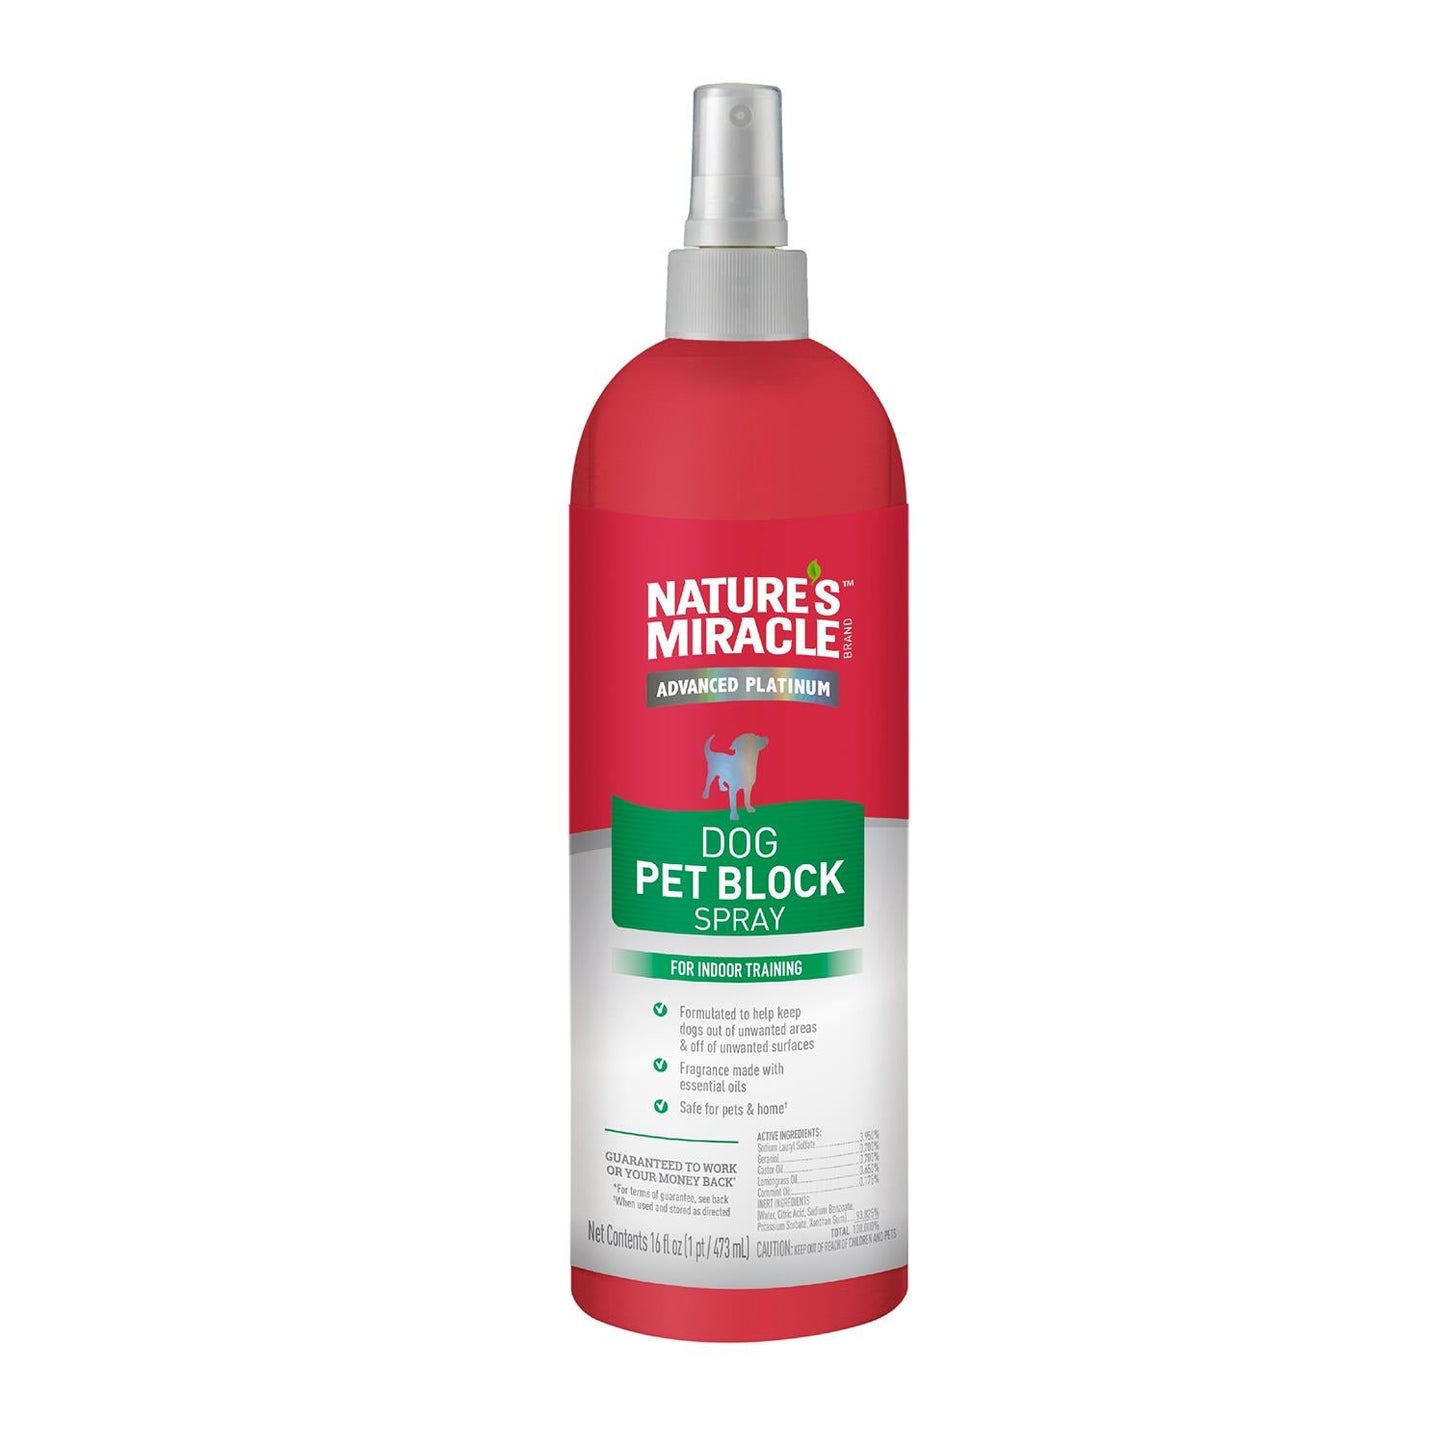 Nature’s Miracle Advanced Platinum Dog Pet Block Spray - 473ml - Tuck In Healthy Pet Food & Animal Natural Health Supplies